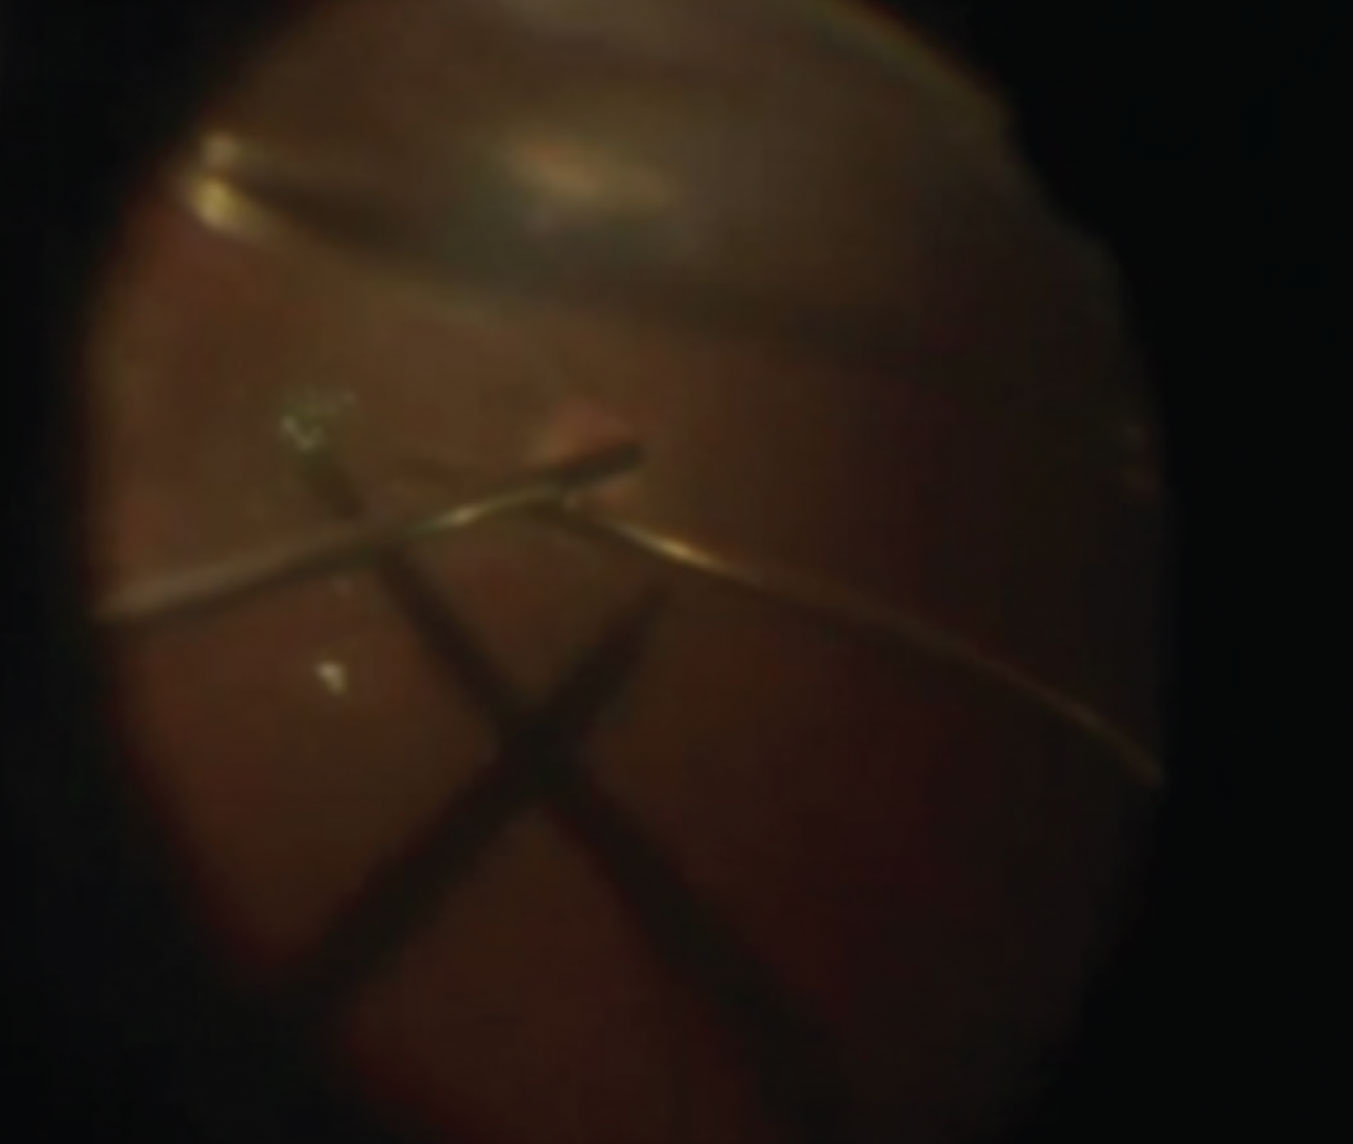 Figure 6. Bimanual technique for holding a free ILM flap in place. Chandelier illumination facilitates the bimanual technique of holding the ILM free flap over the macular hole  during fluid-air exchange (see partial air fill at the top of the image).